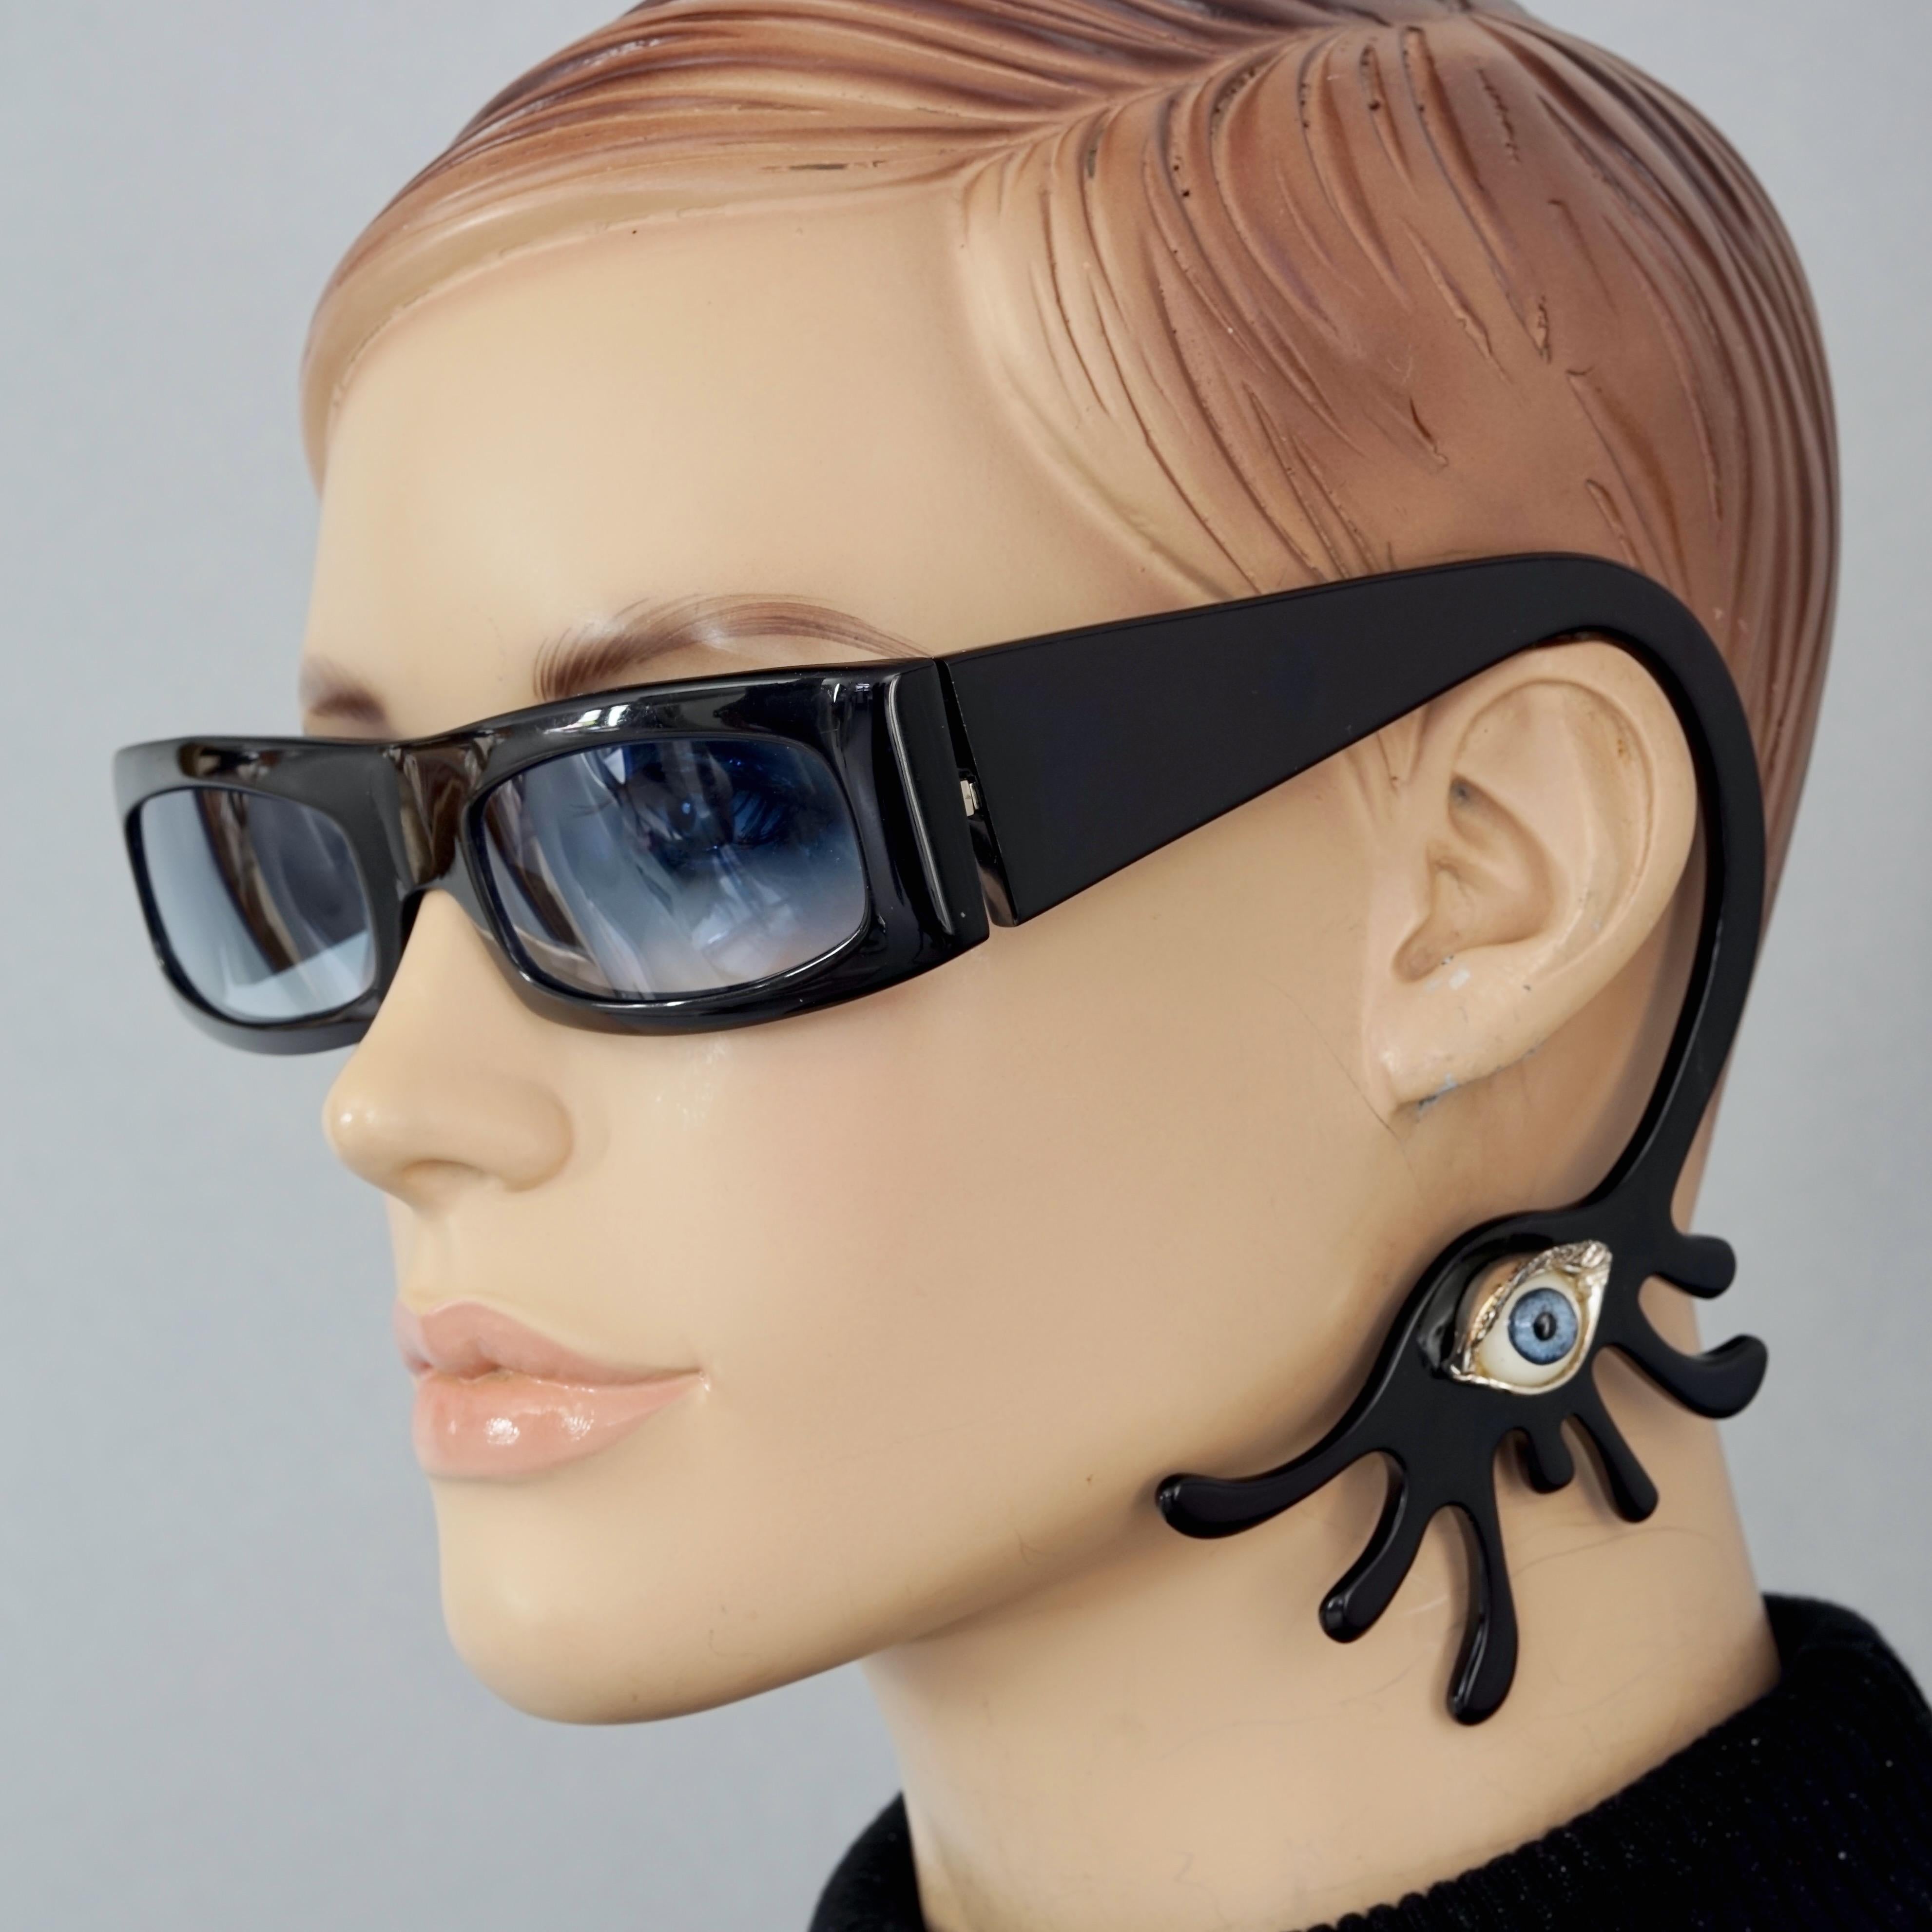 RARE Alain MIKLI and Delfina DELLETREZ Murano Evil Eye Novelty Sunglasses

Measurements:
Height: 1.57 inches (4 cm)
Frame Width: 5.51 inches (14 cm)

Features:
- 100% Authentic Alain MIKLI and Delfina DELLETREZ collaboration sunglasses. 
- One ear